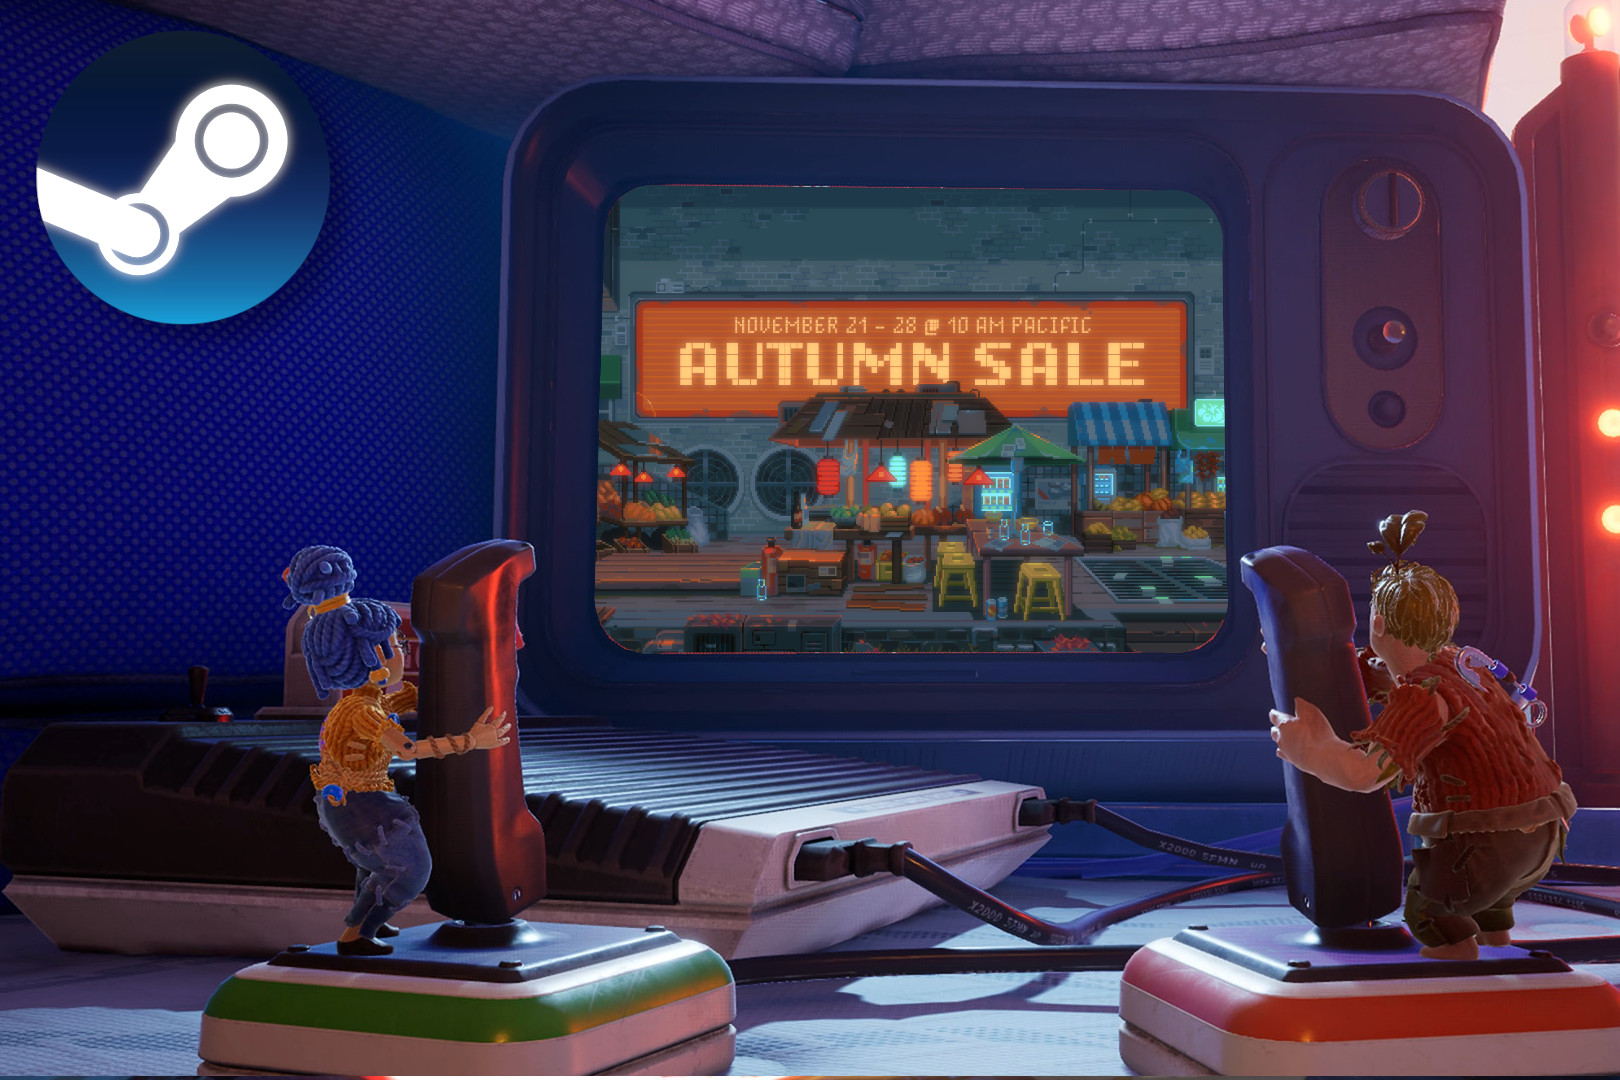 4 epic Steam Autumn Sale local multiplayer games for couch co-op chaos